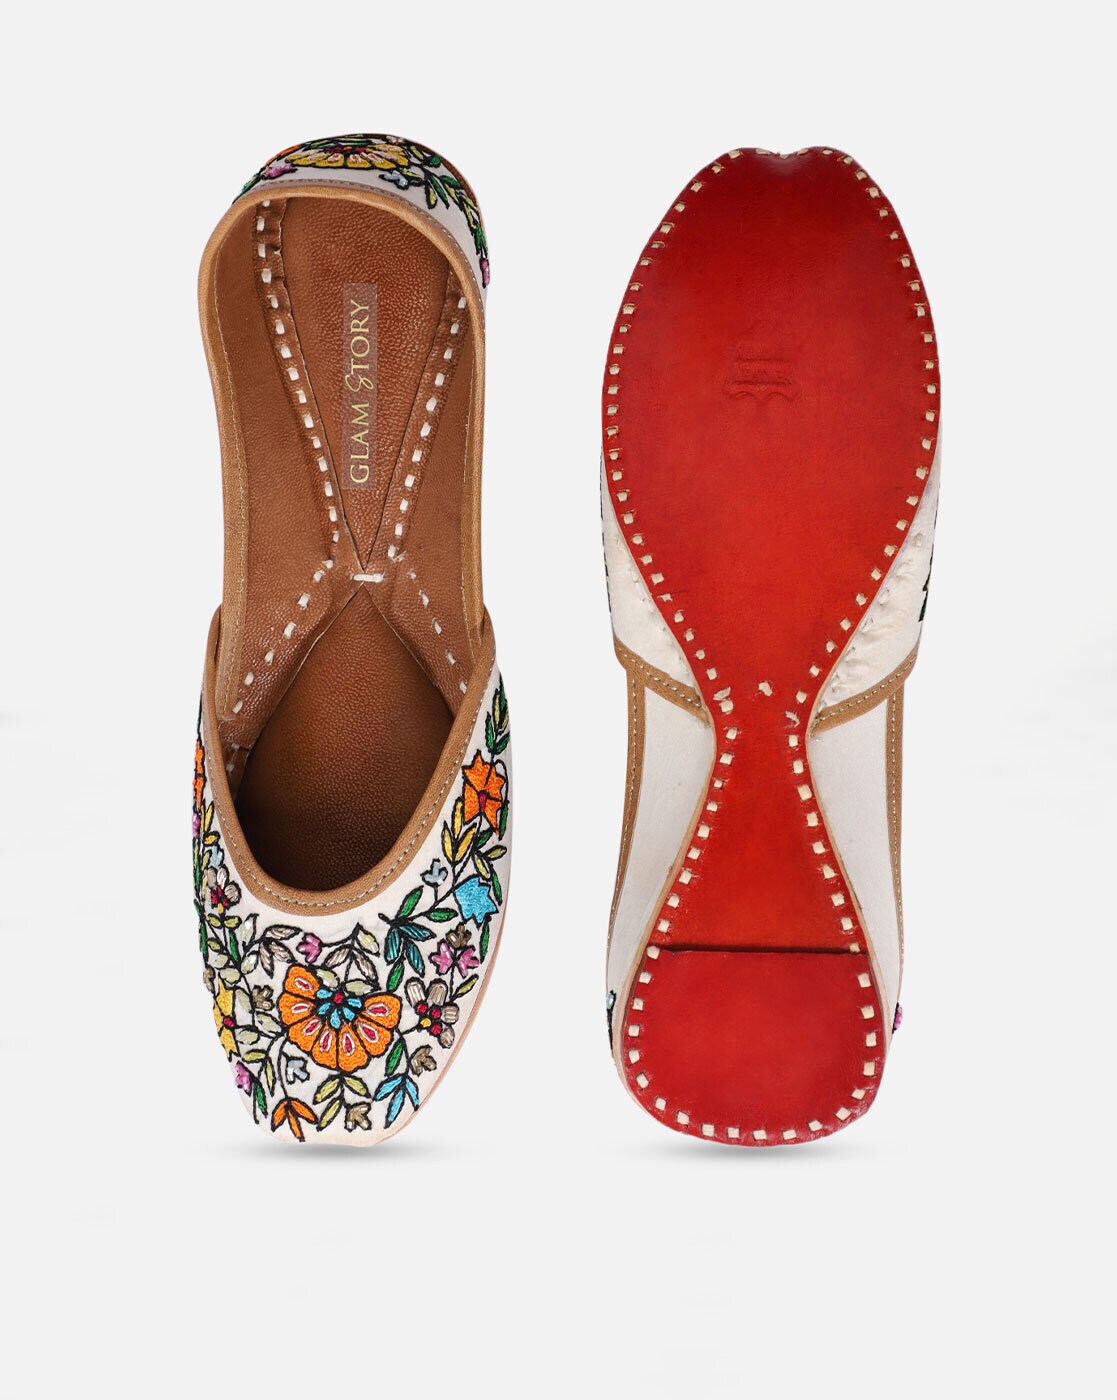 Classic Editions Comfort Embellished Shoes (each) Delivery or Pickup Near  Me - Instacart